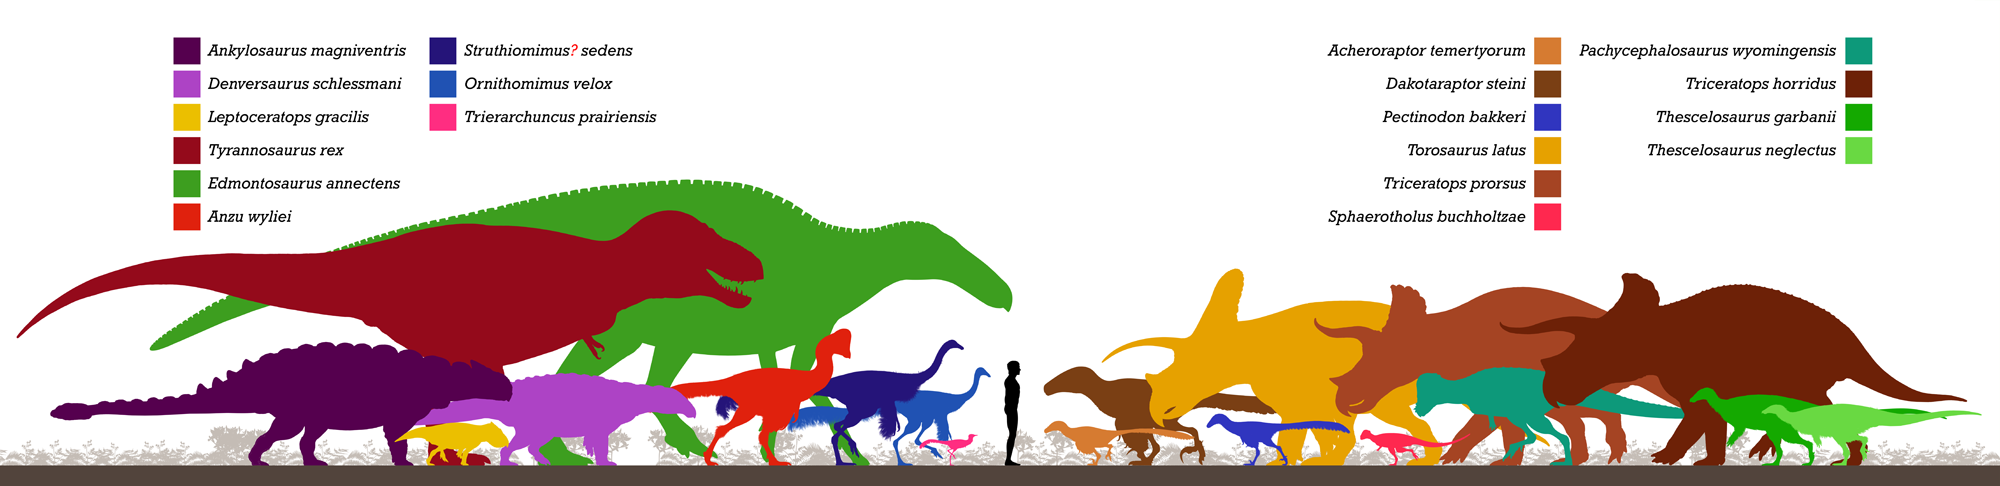 Diagram showing silhouettes of the dinosaurs of the Late Cretaceous Hell Creek Formation. Different silhouettes are different colors, which makes them distinguishable from one another. The largest is Edmontasaurus annectens, a duck-billed dinosaur, and Tyrannosaurus rex is the second-largest. Others include horned dinosaurs, armored dinosaurs, and a variety of smaller dinosaurs. In total, 19 dinosaurs are shown.